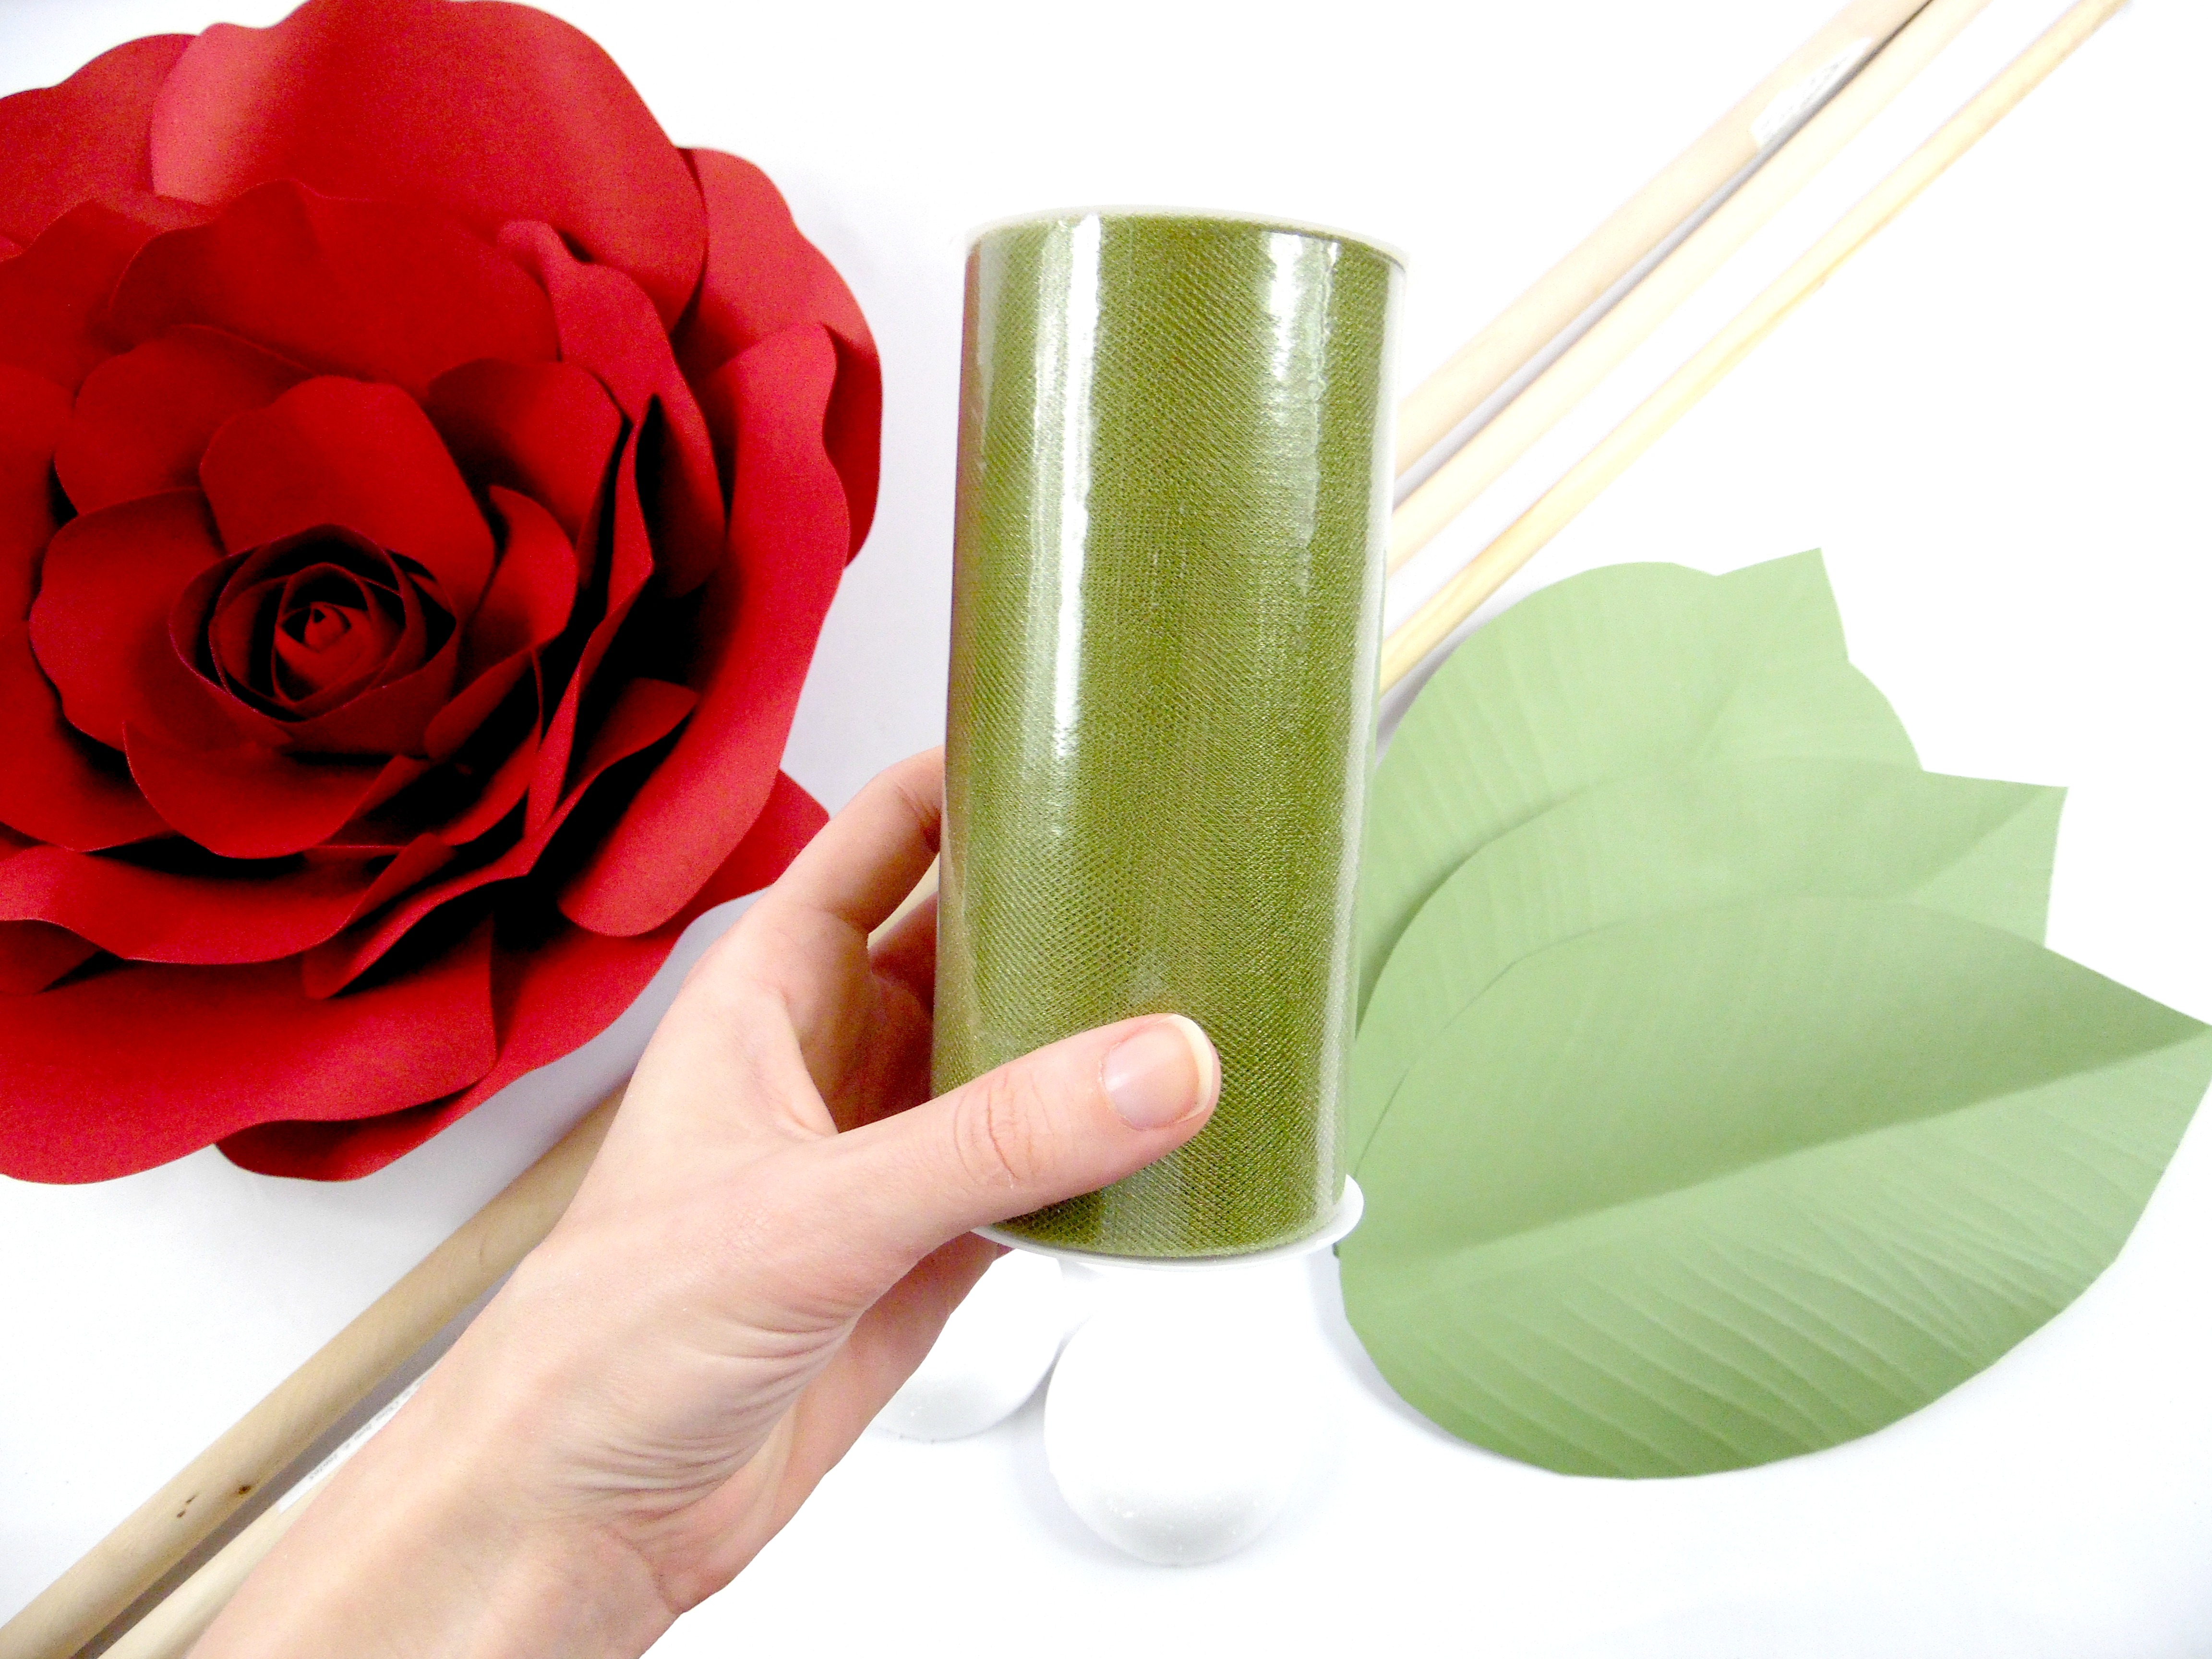 In this giant paper flower stem tutorial, I use green tulle to wrap around the dowel, matching the yellow-green color of natural flower leaves.